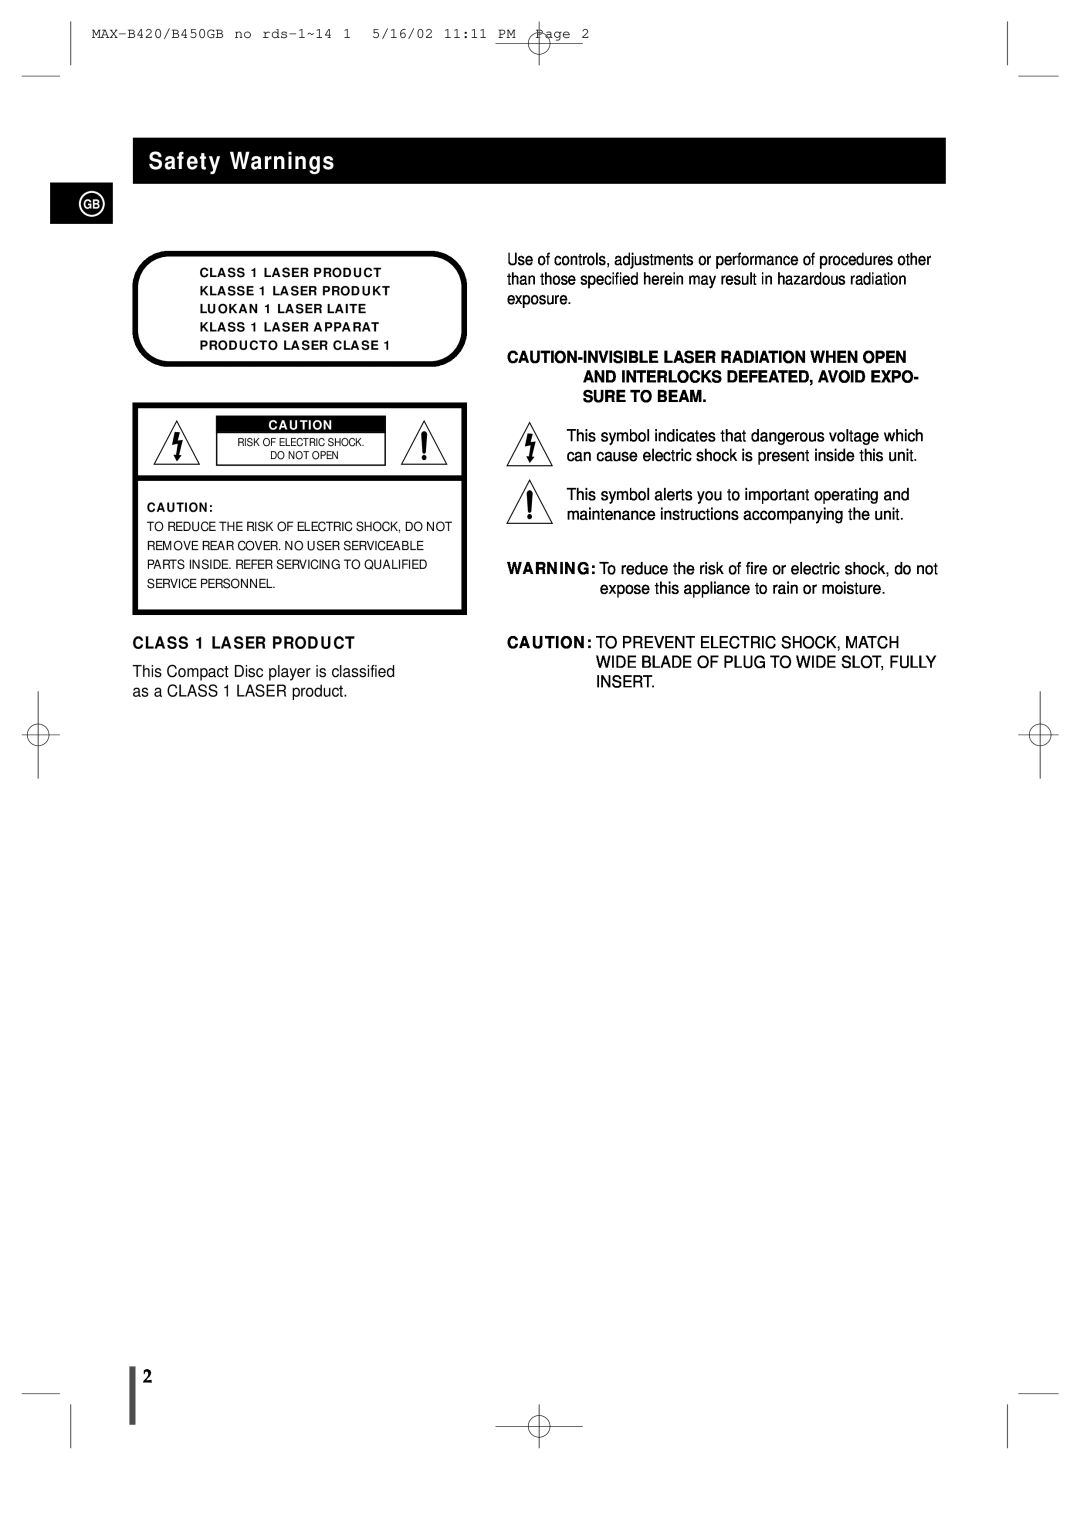 Samsung MAX-B450 instruction manual Safety Warnings, CLASS 1 LASER PRODUCT 